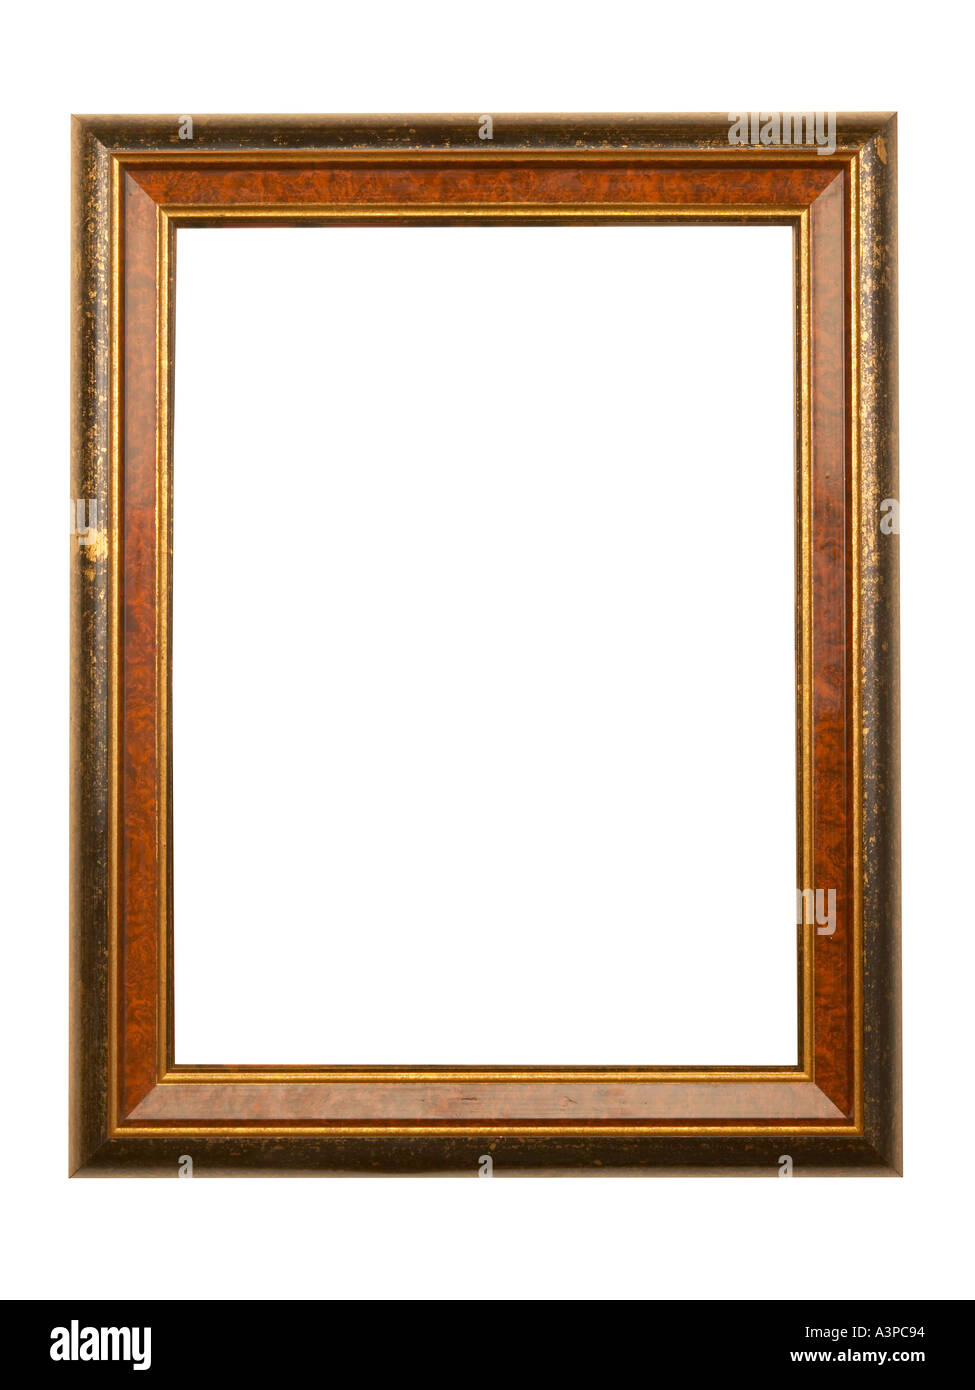 GILT AND STAINED WOOD PICTURE FRAME ON WHITE BACKGROUND Stock Photo